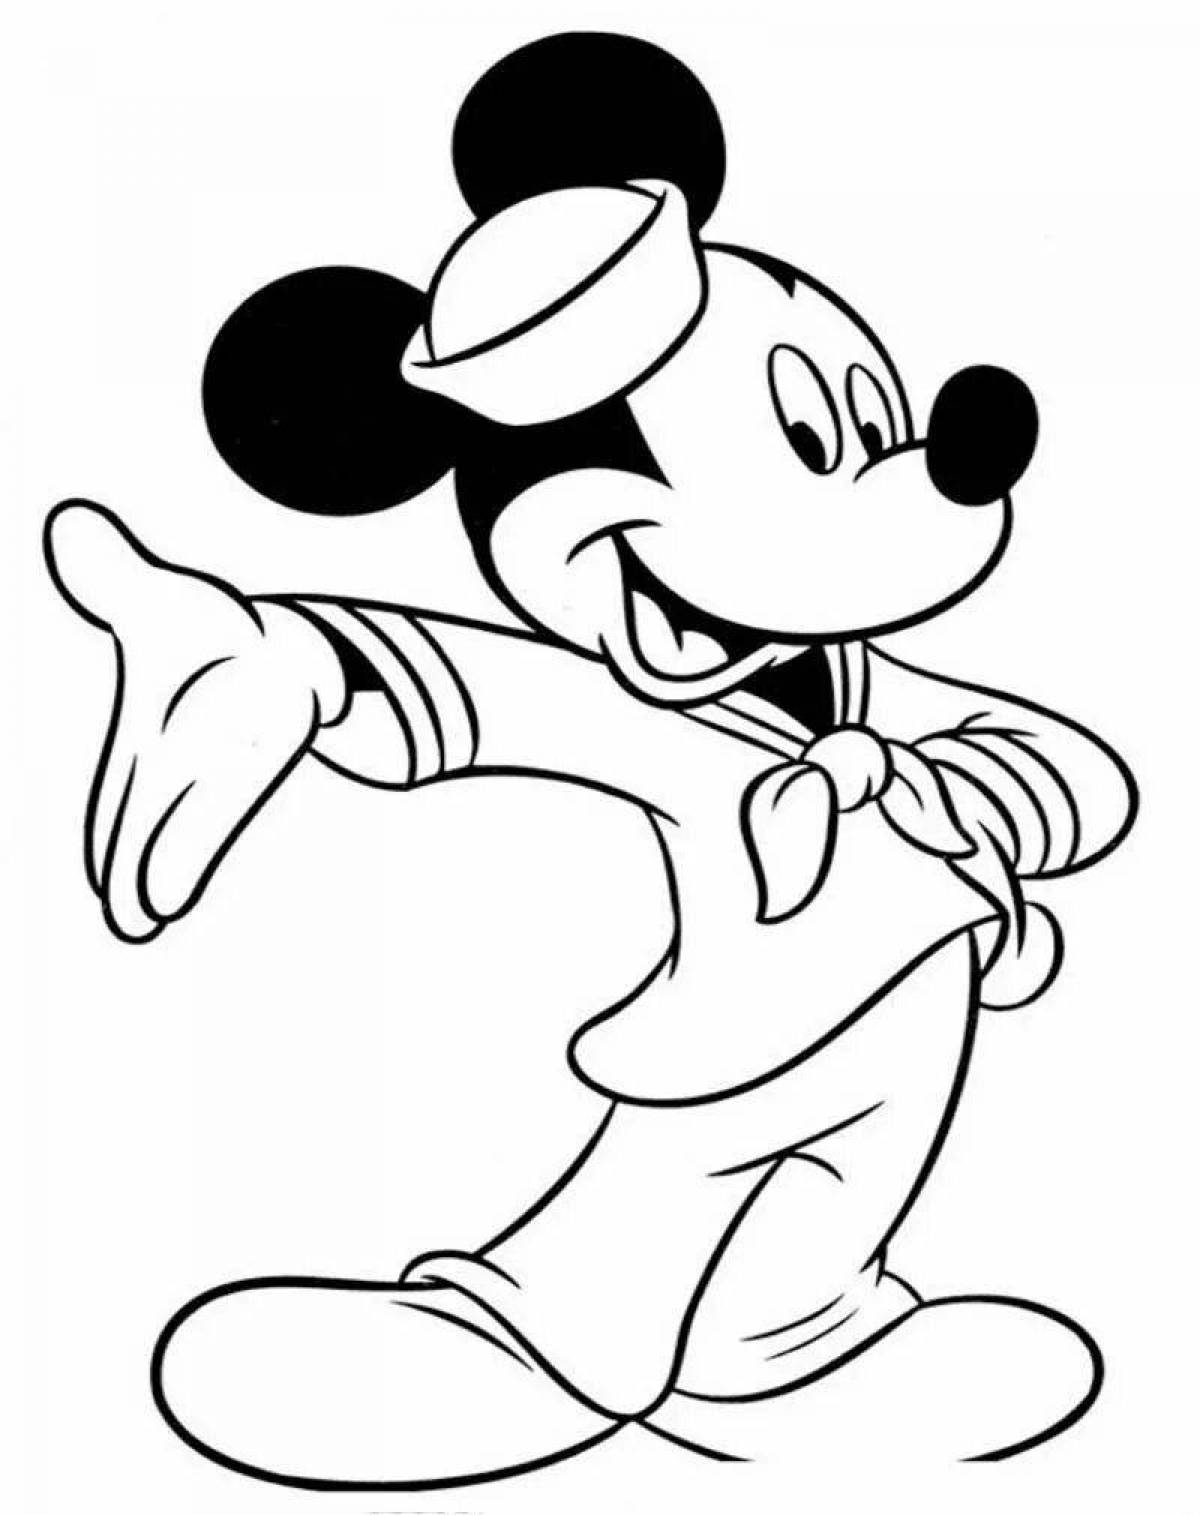 Mickey mouse's vibrant coloring book